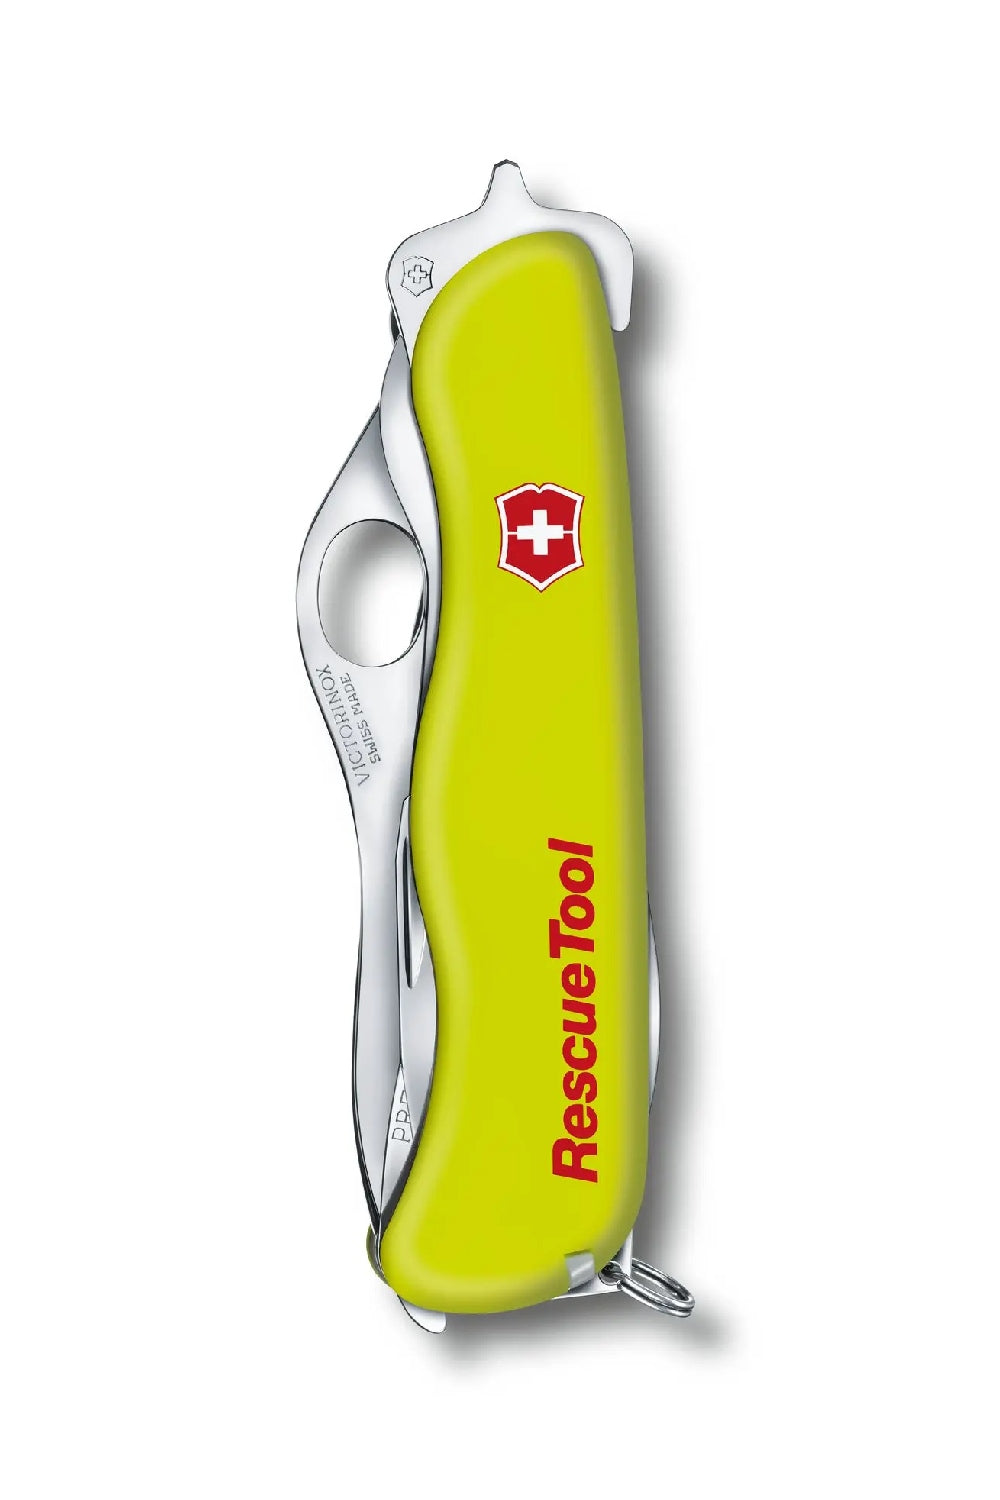 Victorinox Rescue Tool Swiss Army Large Pocket Knife with Shatterproof Glass Saw in Luminescent